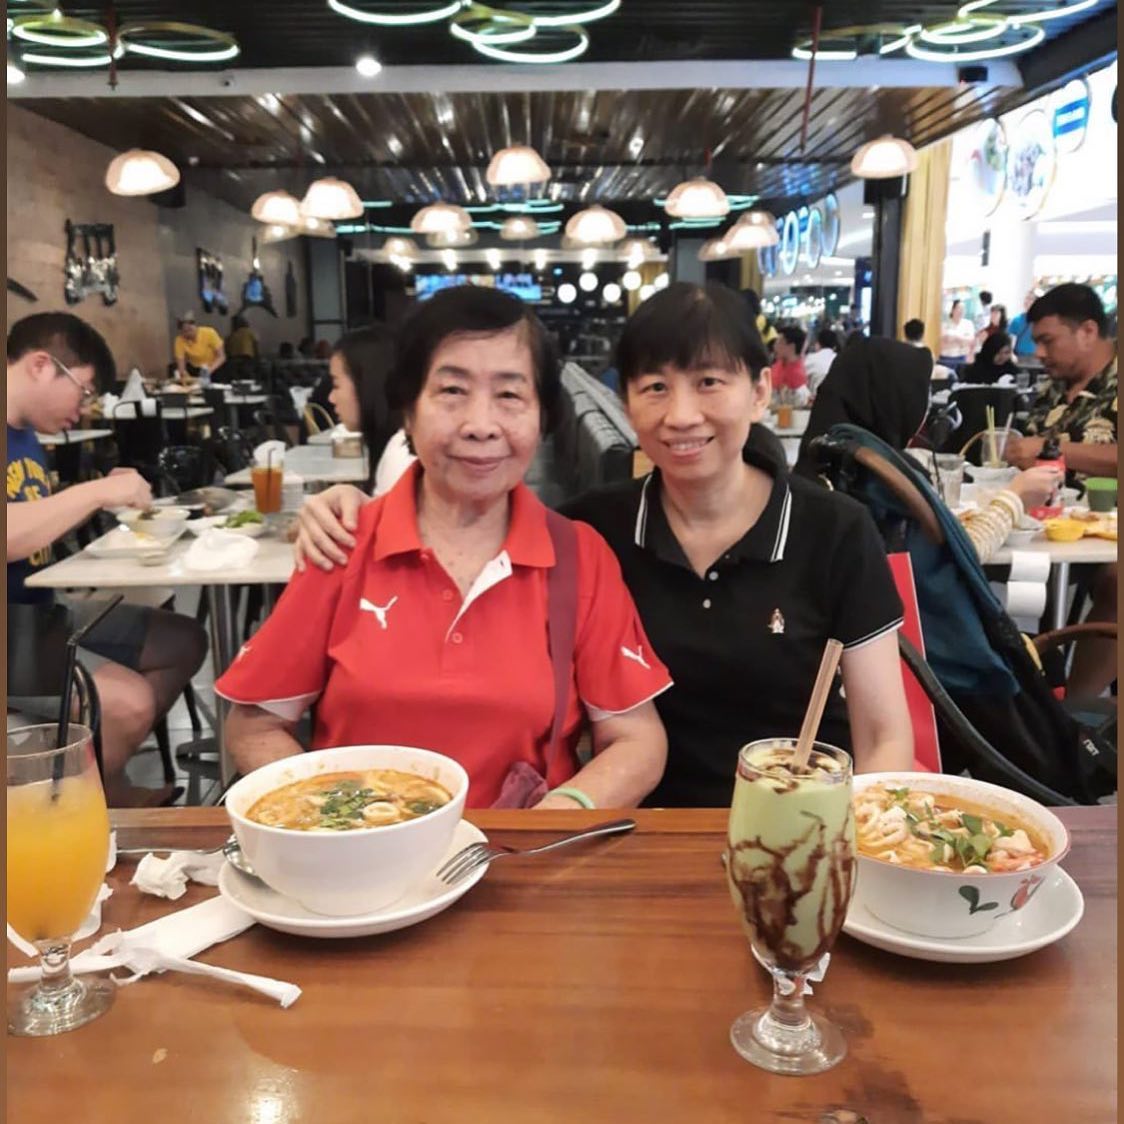 Tom Yum and family
Enjoy good Thai Food at Kinley Thai Bistro
Thank you for sharing @juani_yew67 .